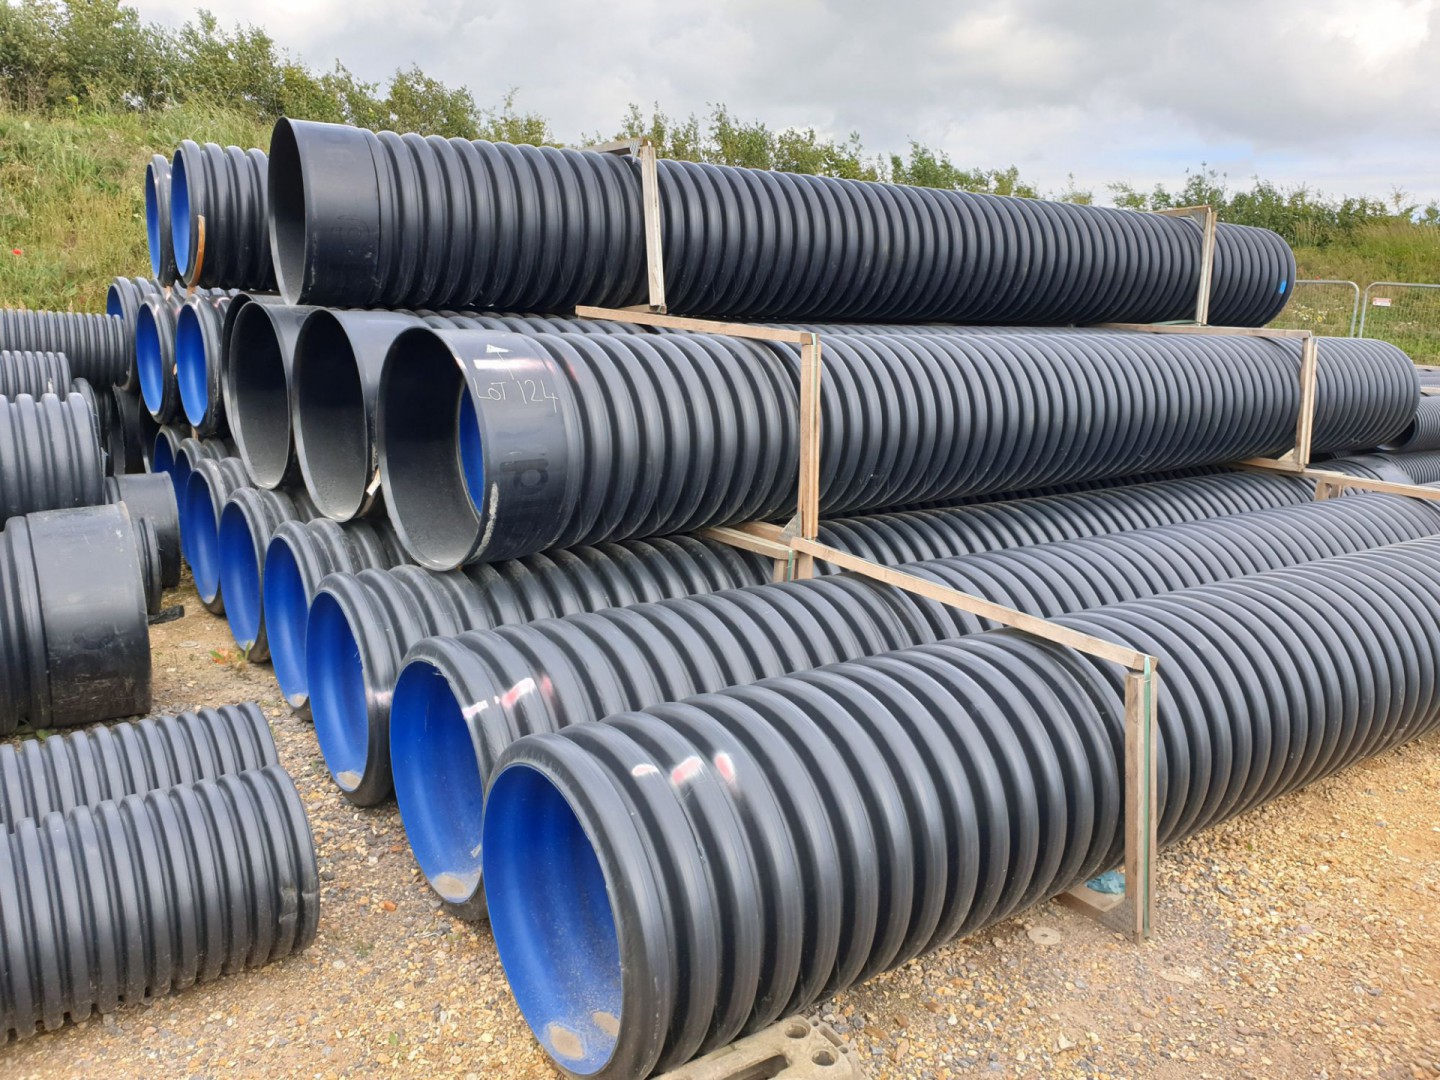 20x Polypipe 600mm dia perforated drainage ducting...